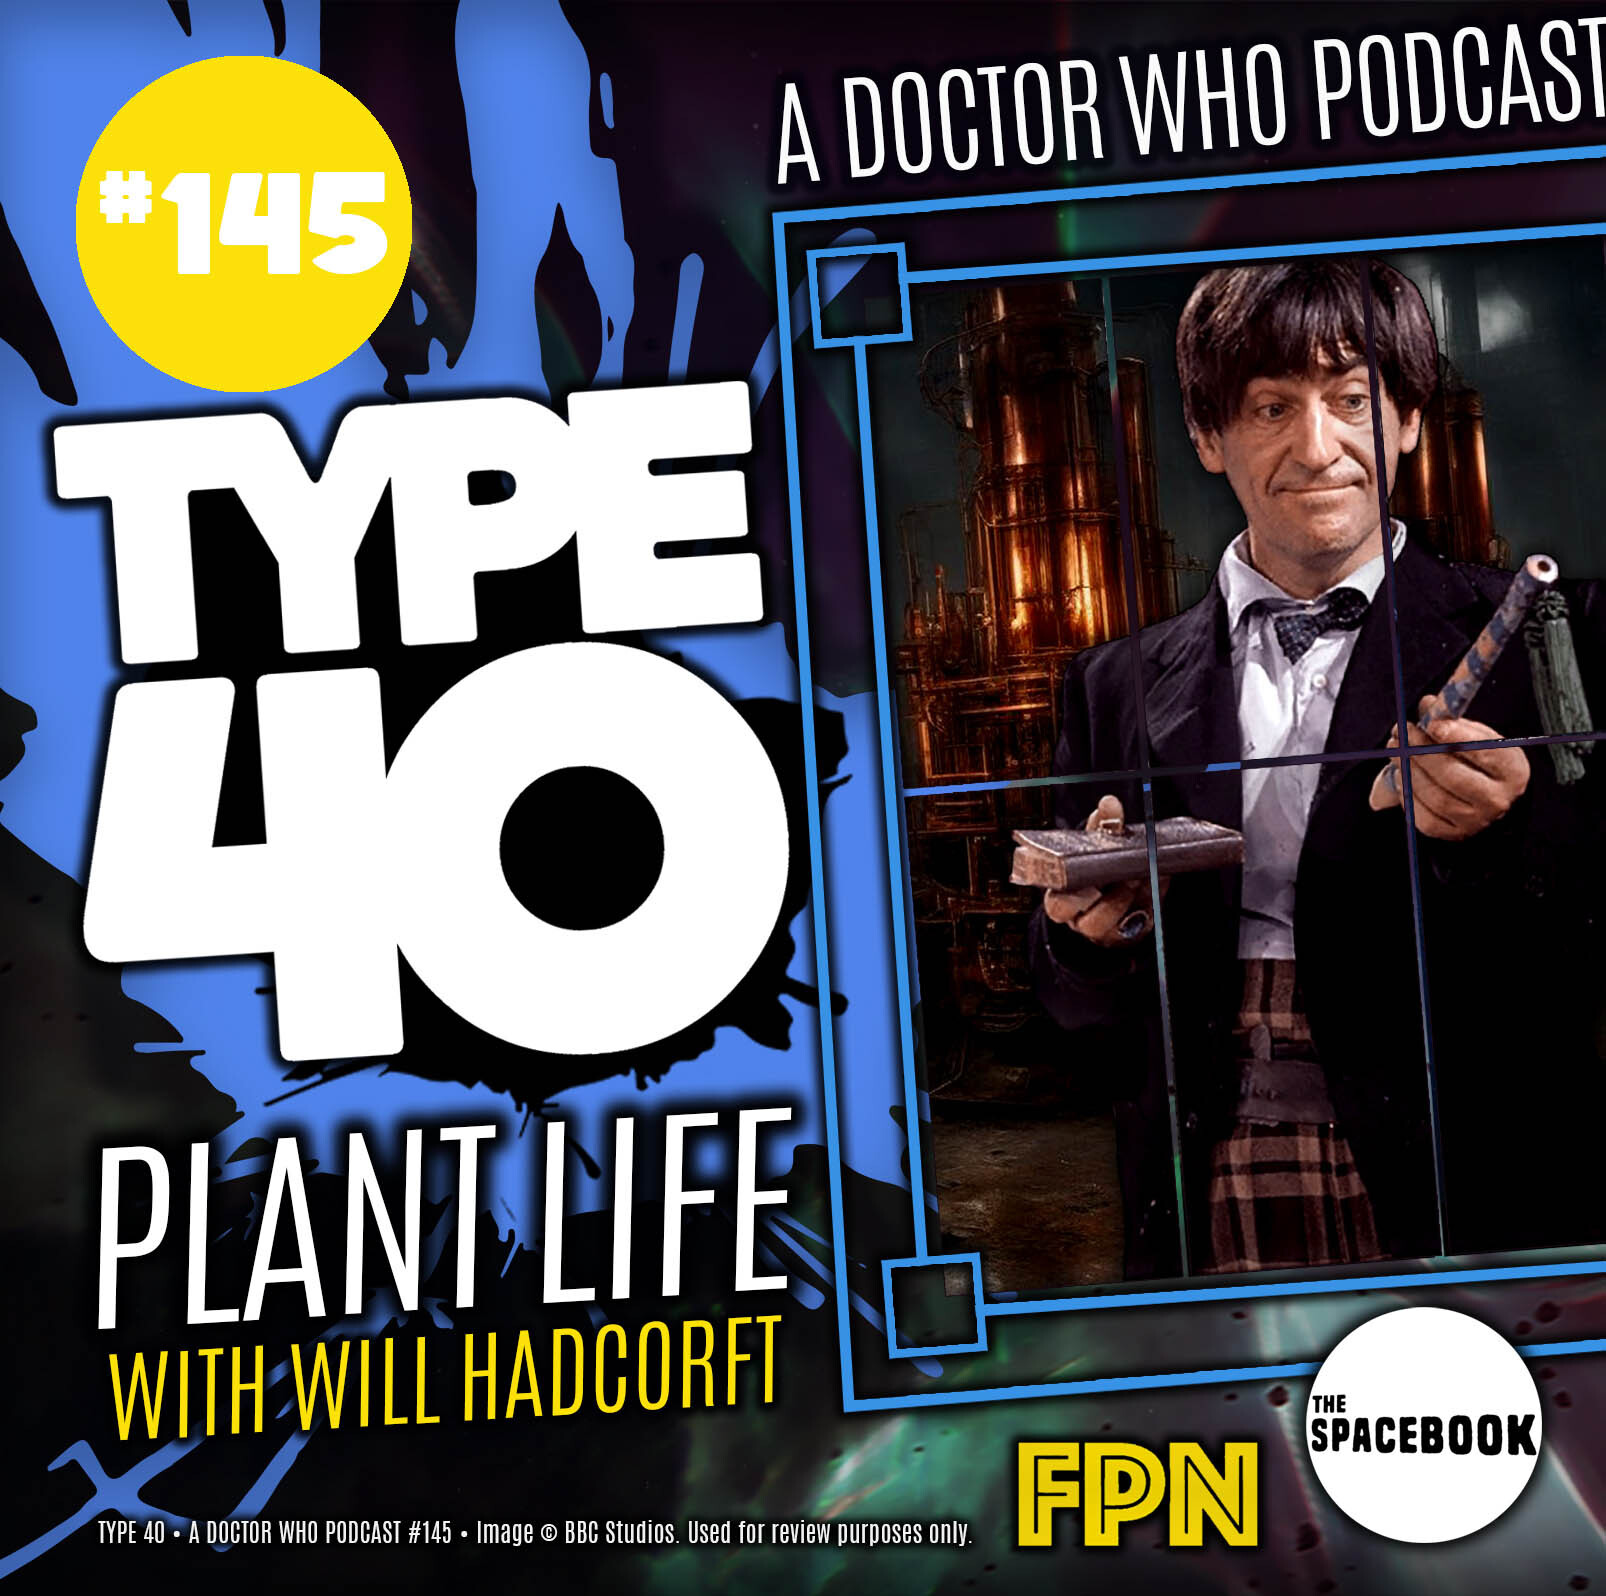 Type 40 • A Doctor Who Podcast Episode 145: Plant Life with Will Hadcroft